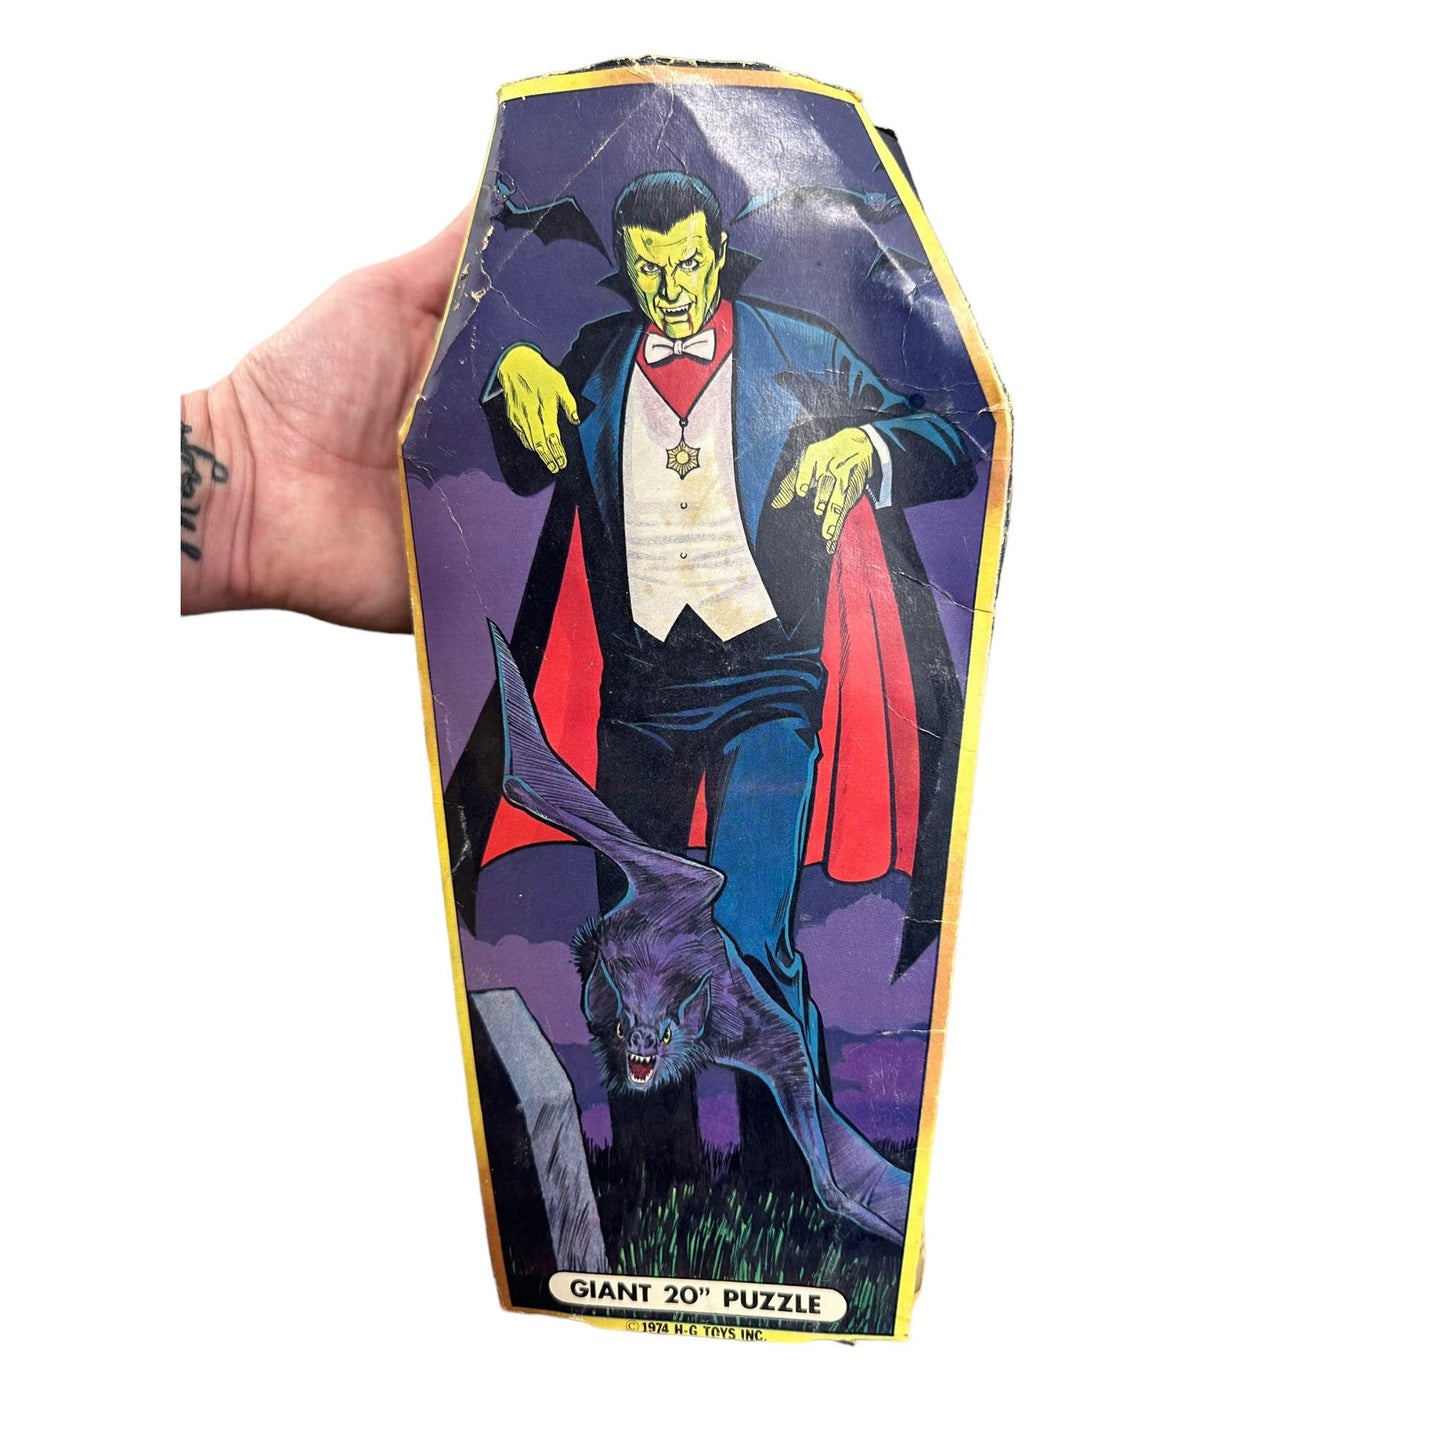 Vintage HG Toys 1974 Dracula Puzzle Coffin Box Monstrous Rare find Collectible